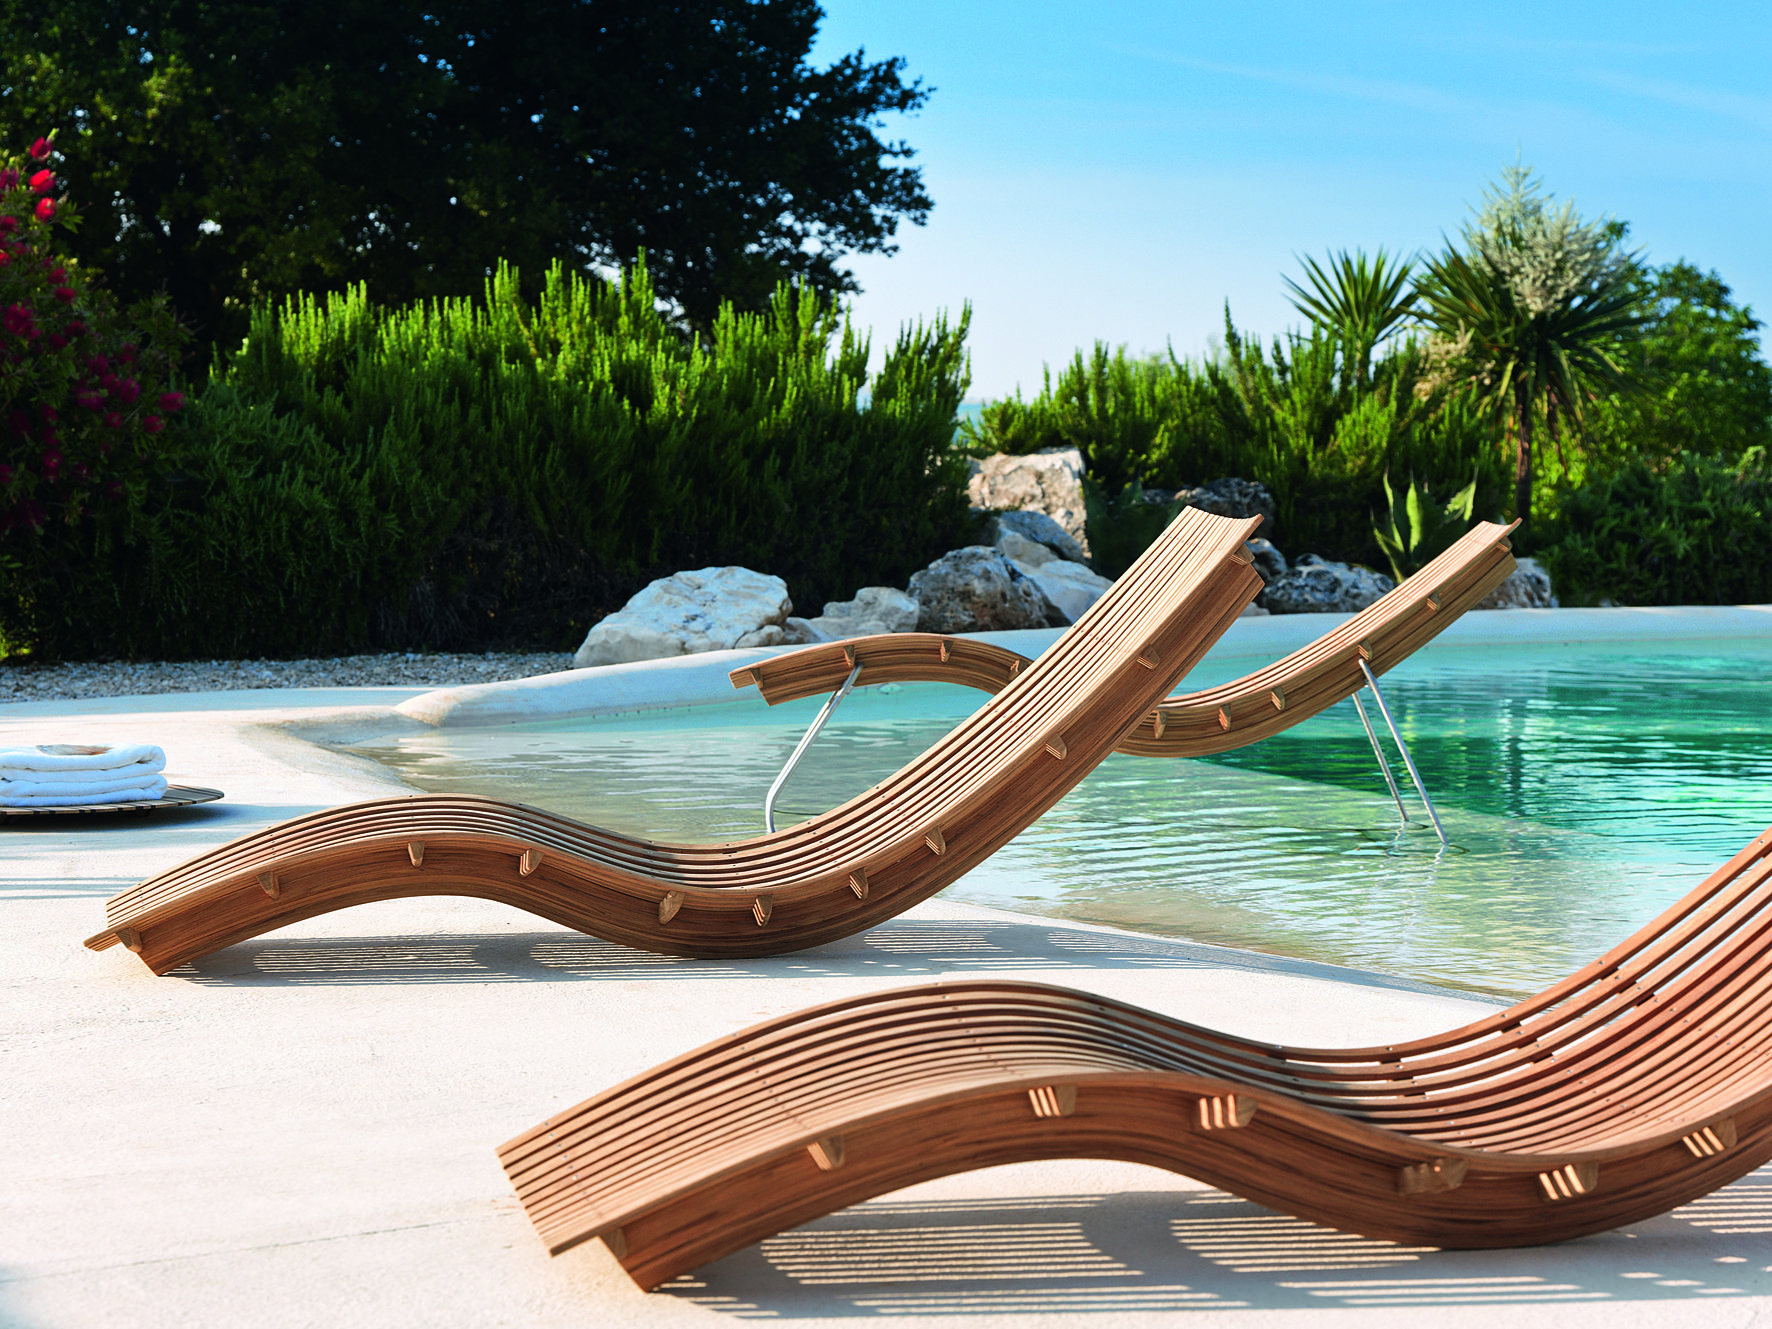 10 Best Pool Lounge Chairs Review, Rating & Buying Guide 2020